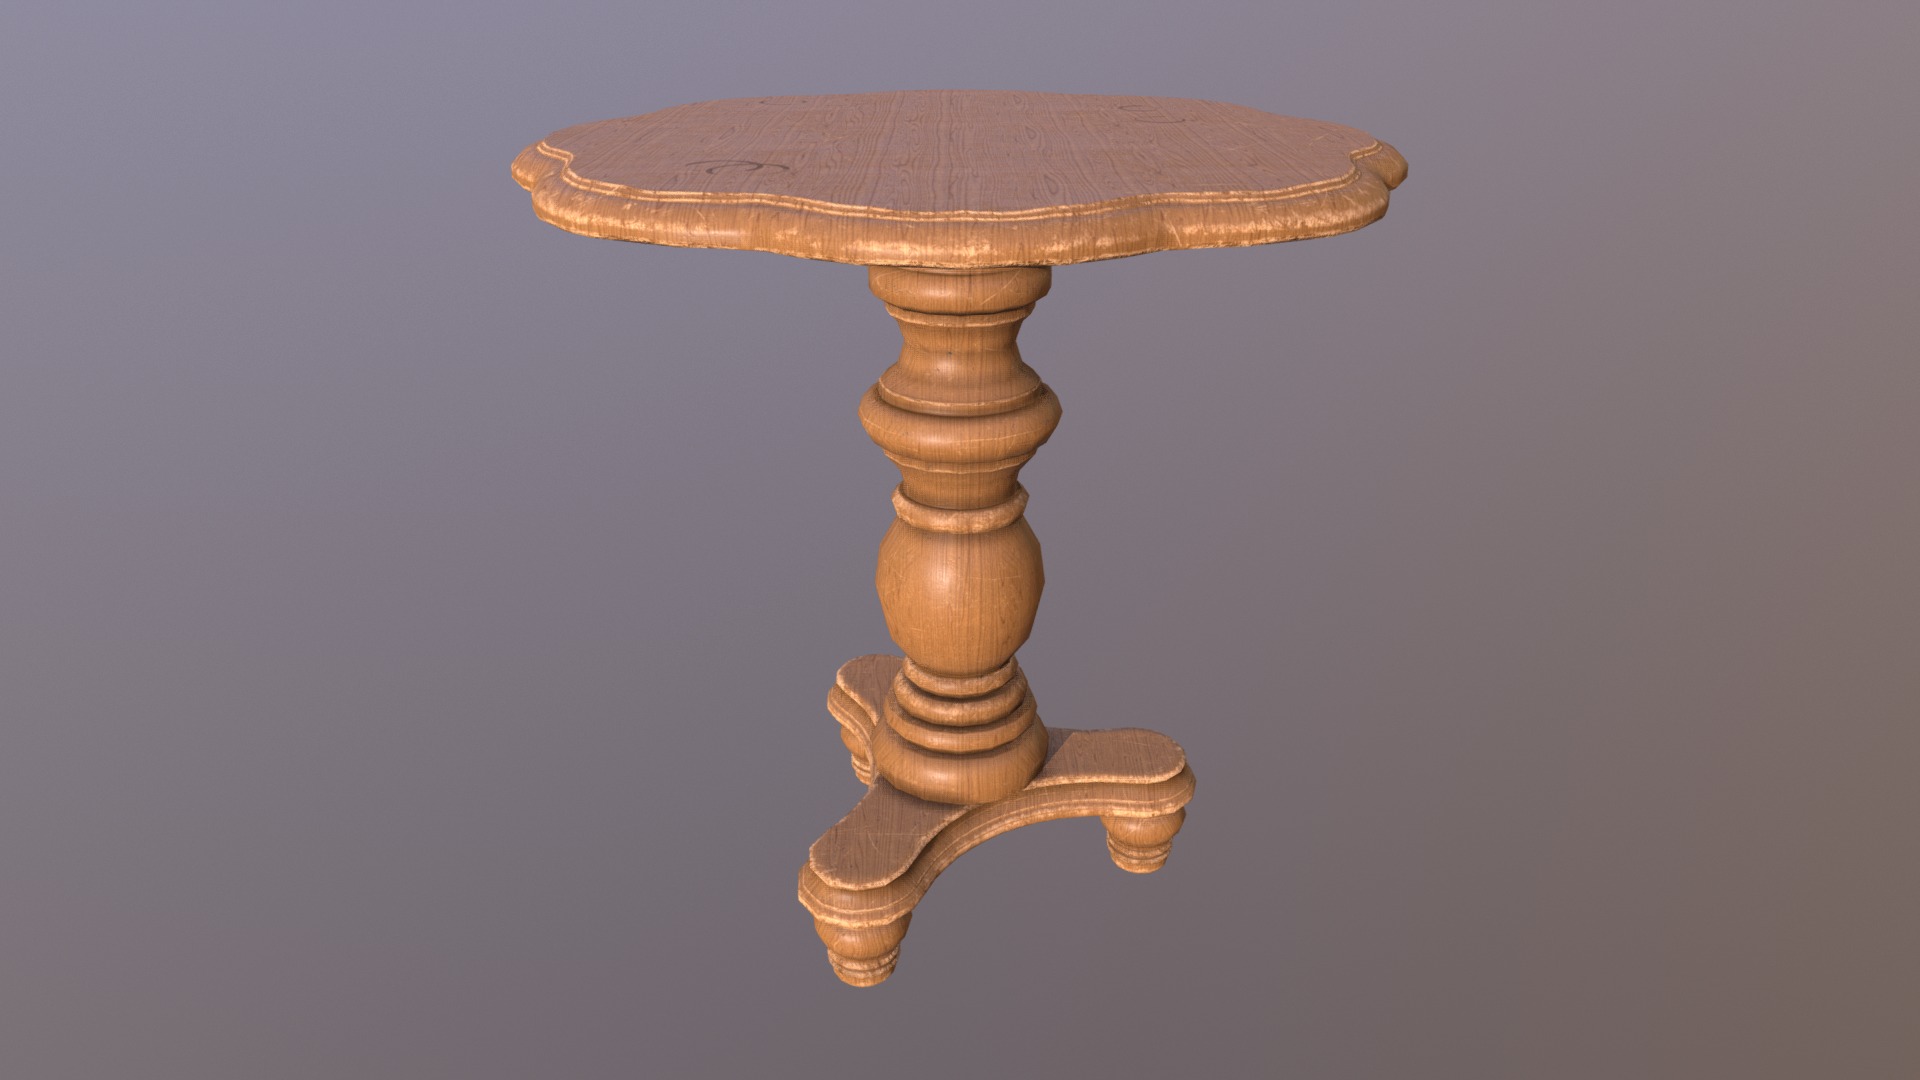 3D model Antique Round Wooden Table #001 - This is a 3D model of the Antique Round Wooden Table #001. The 3D model is about a wooden table with a top.